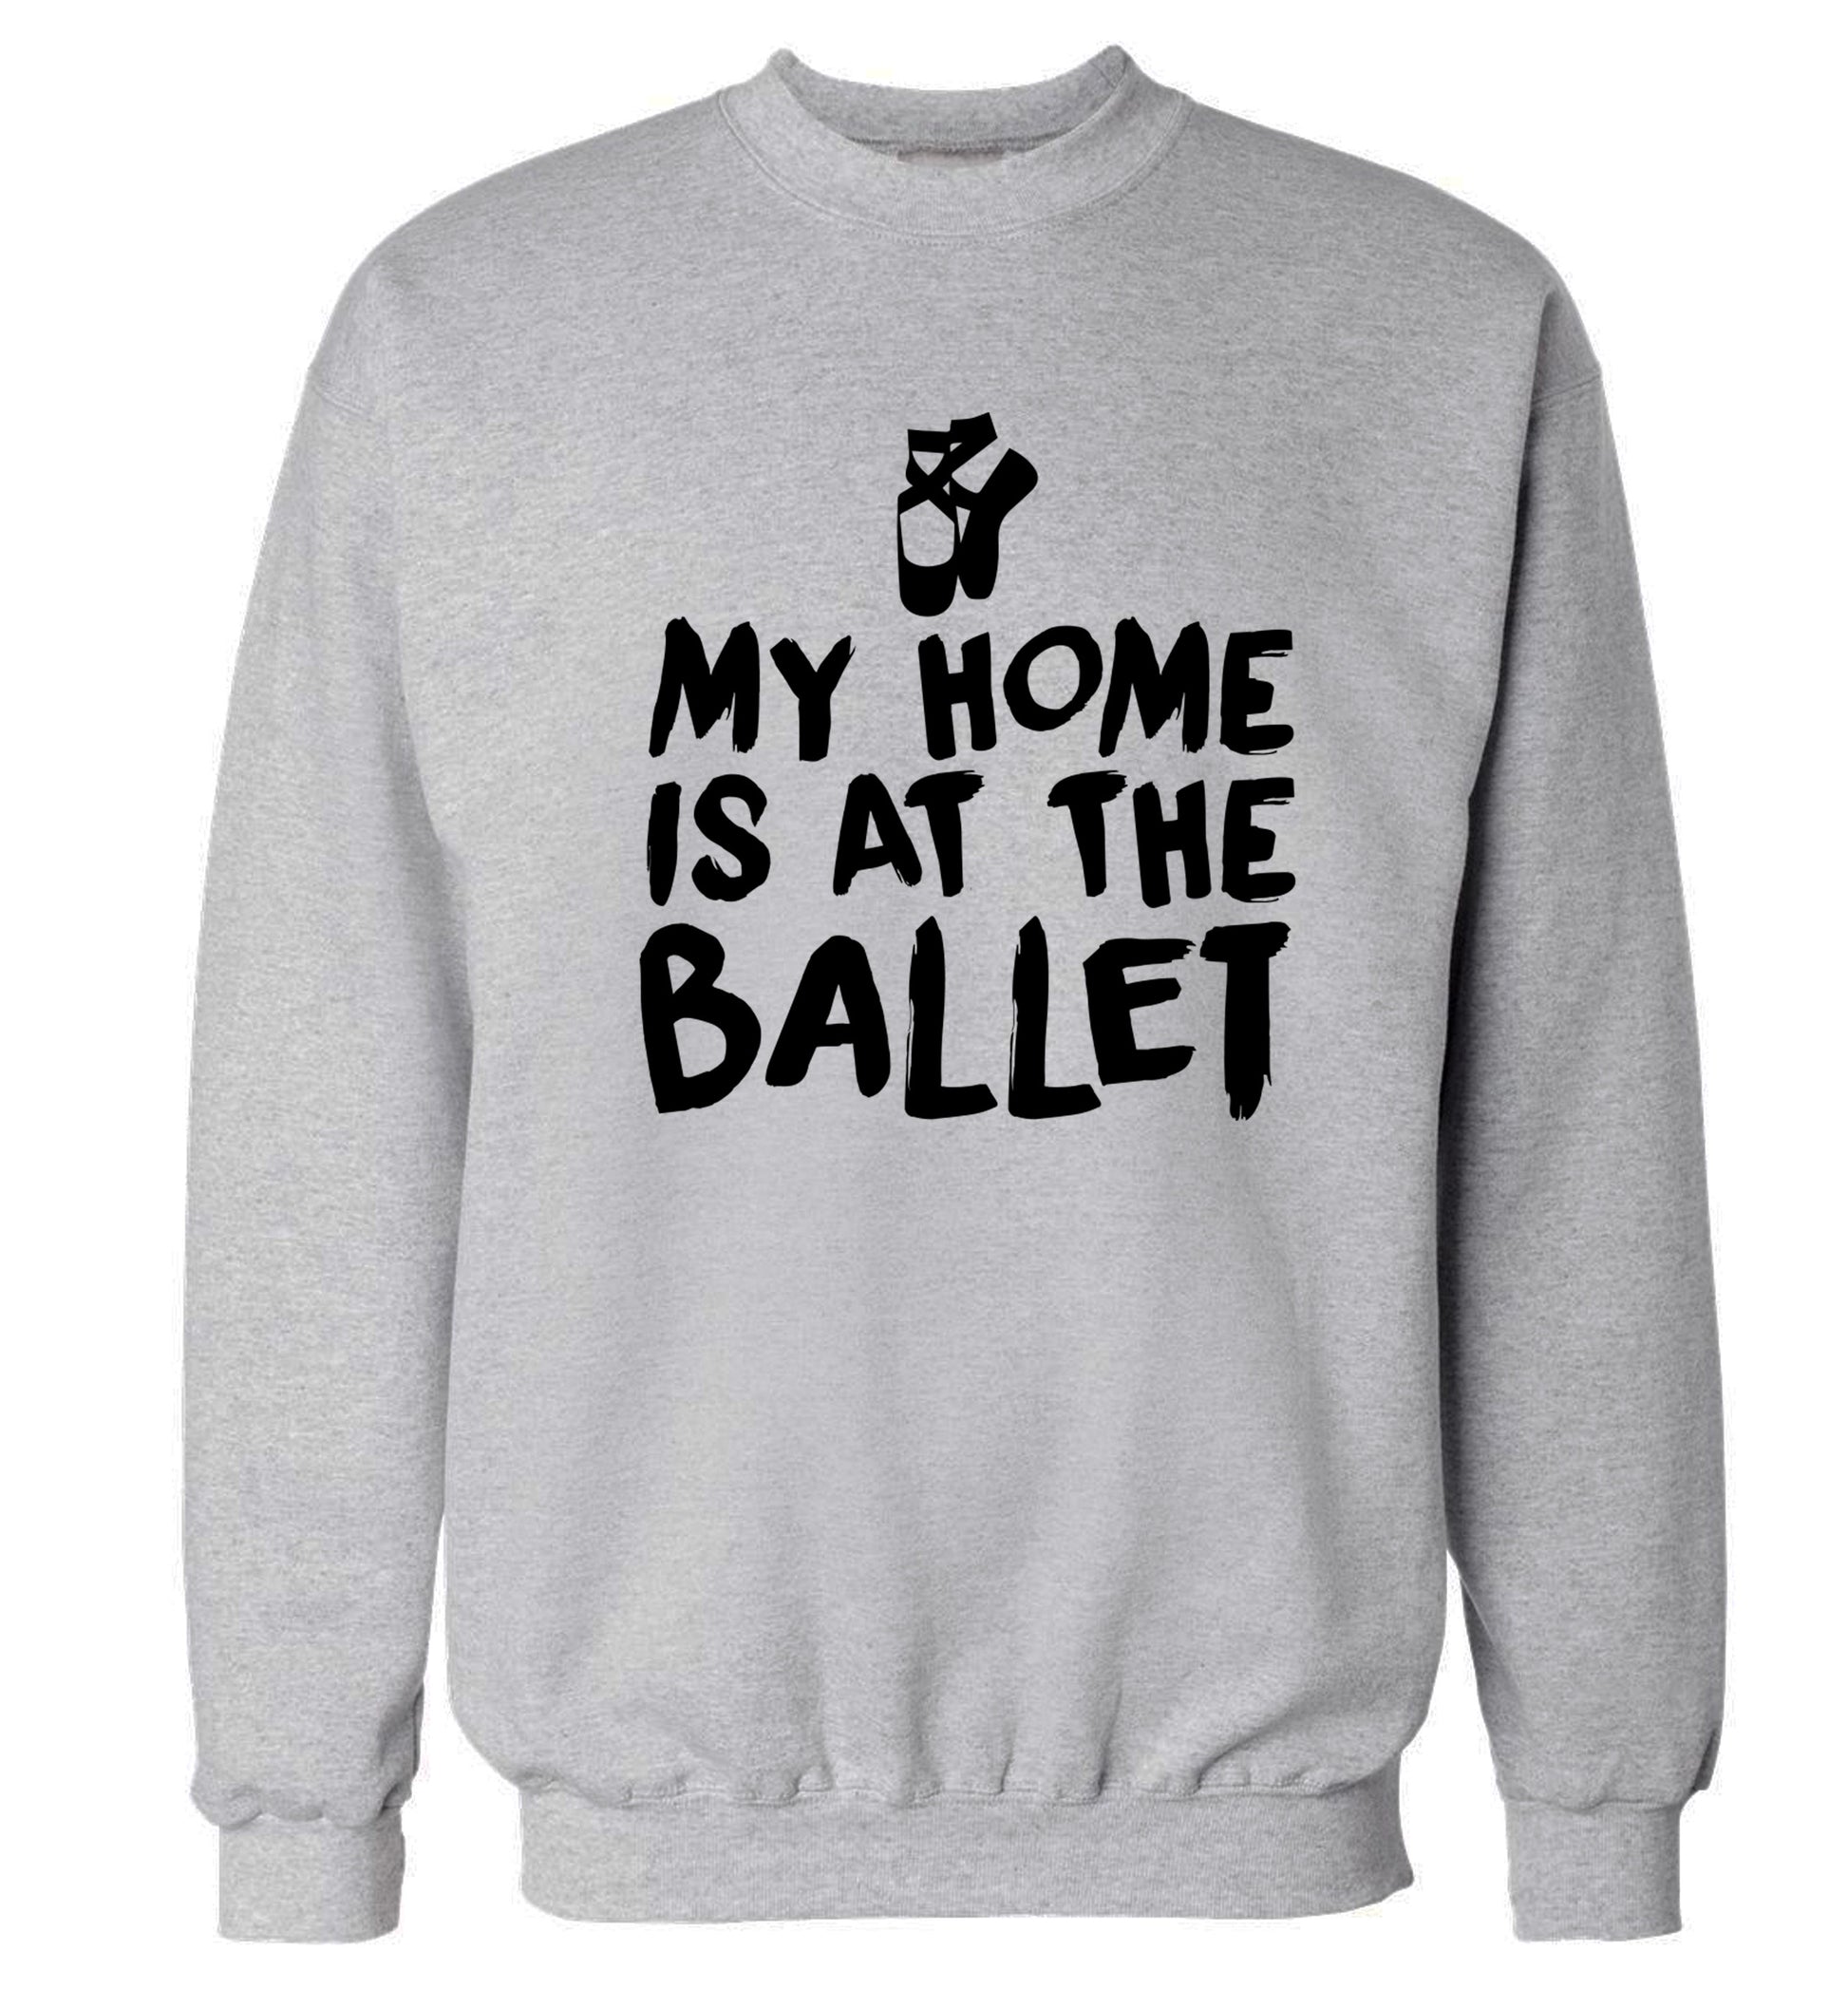 My home is at the ballet Adult's unisex grey Sweater 2XL